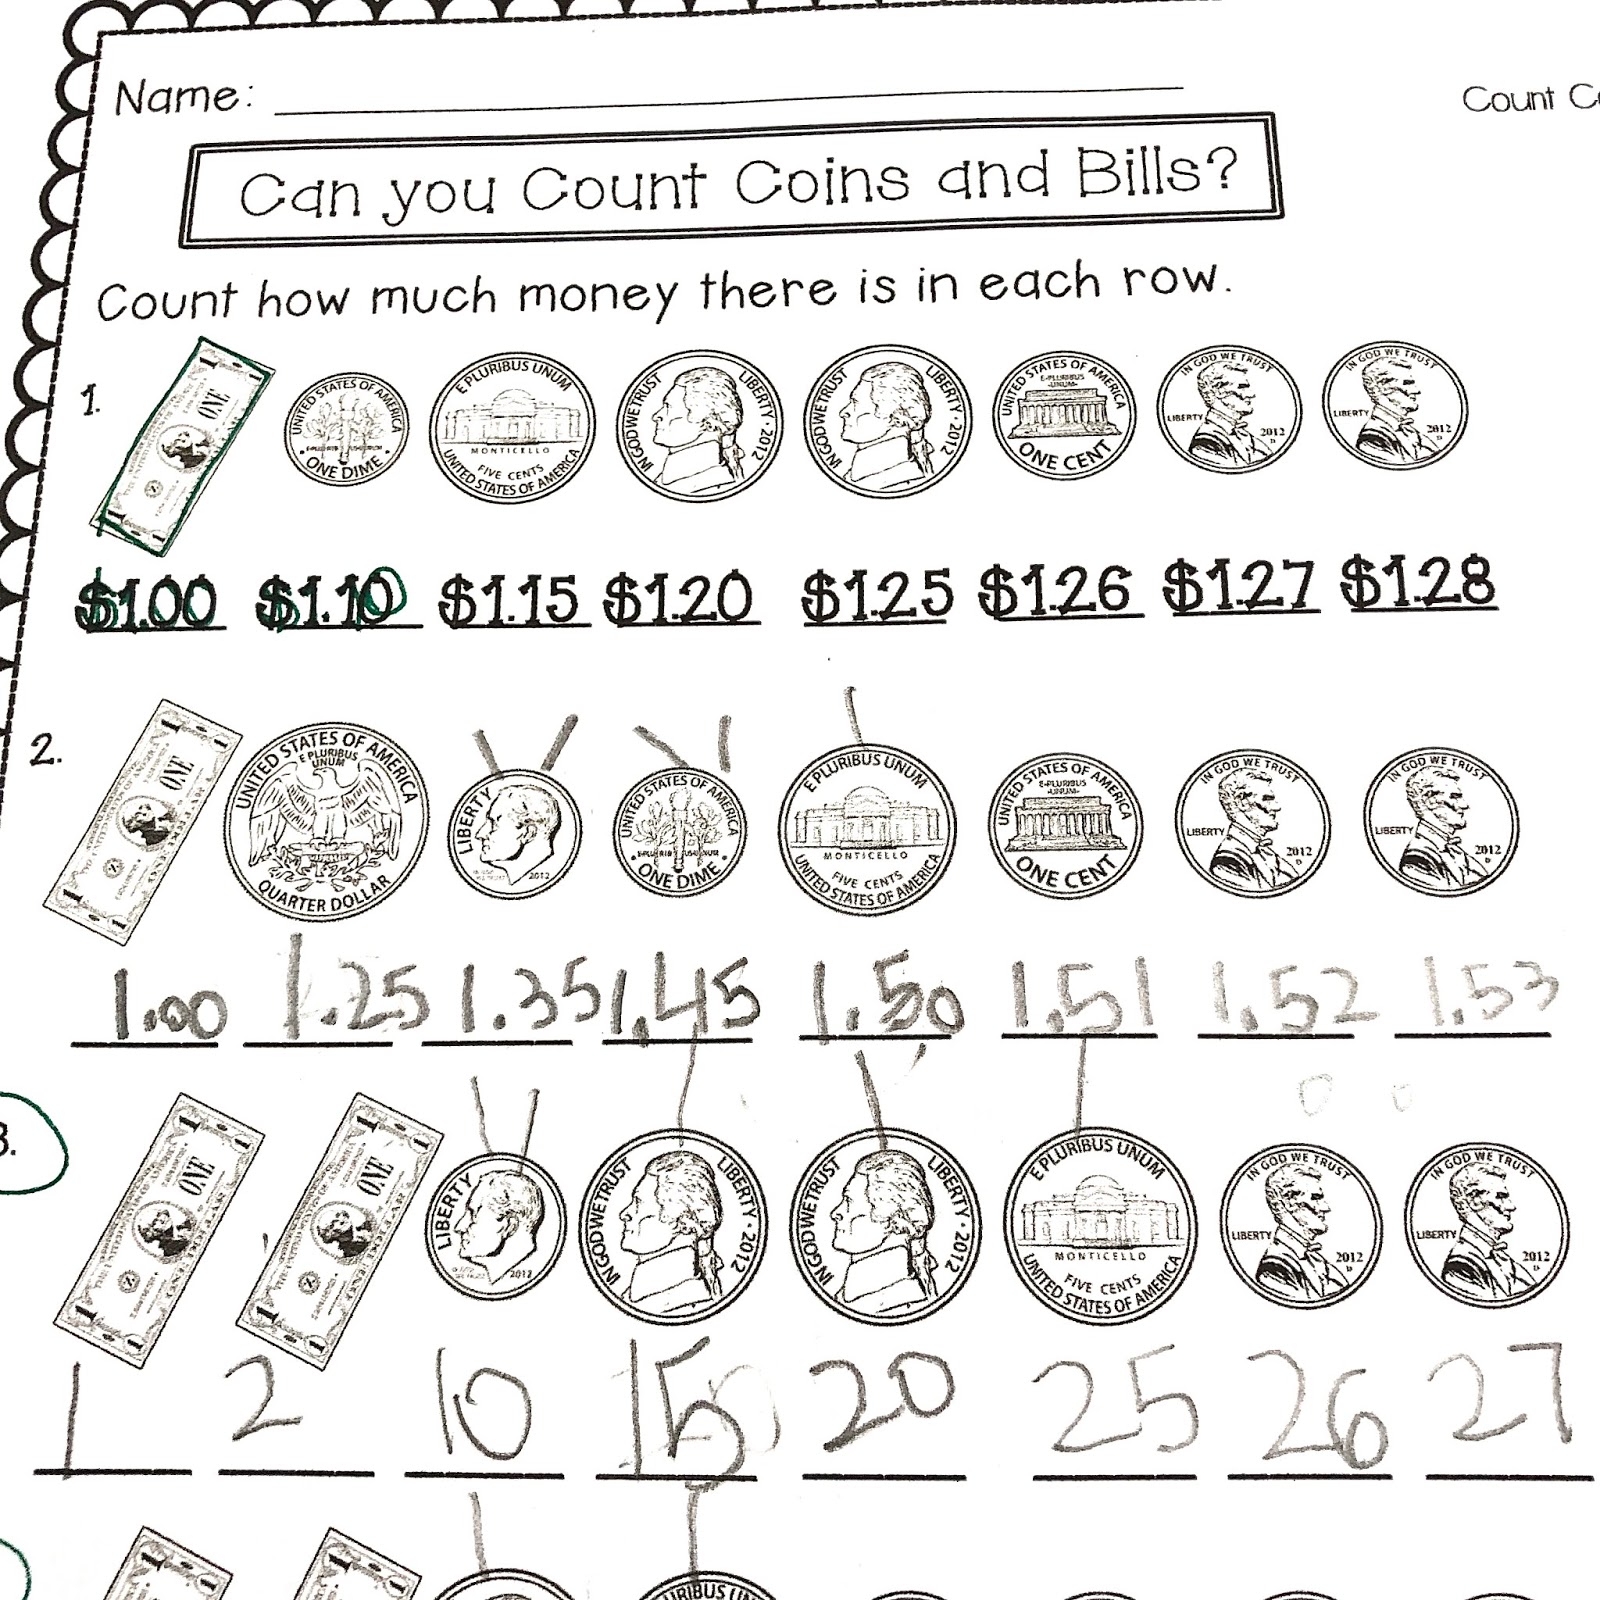 Counting Money with Students - Coins and Bills